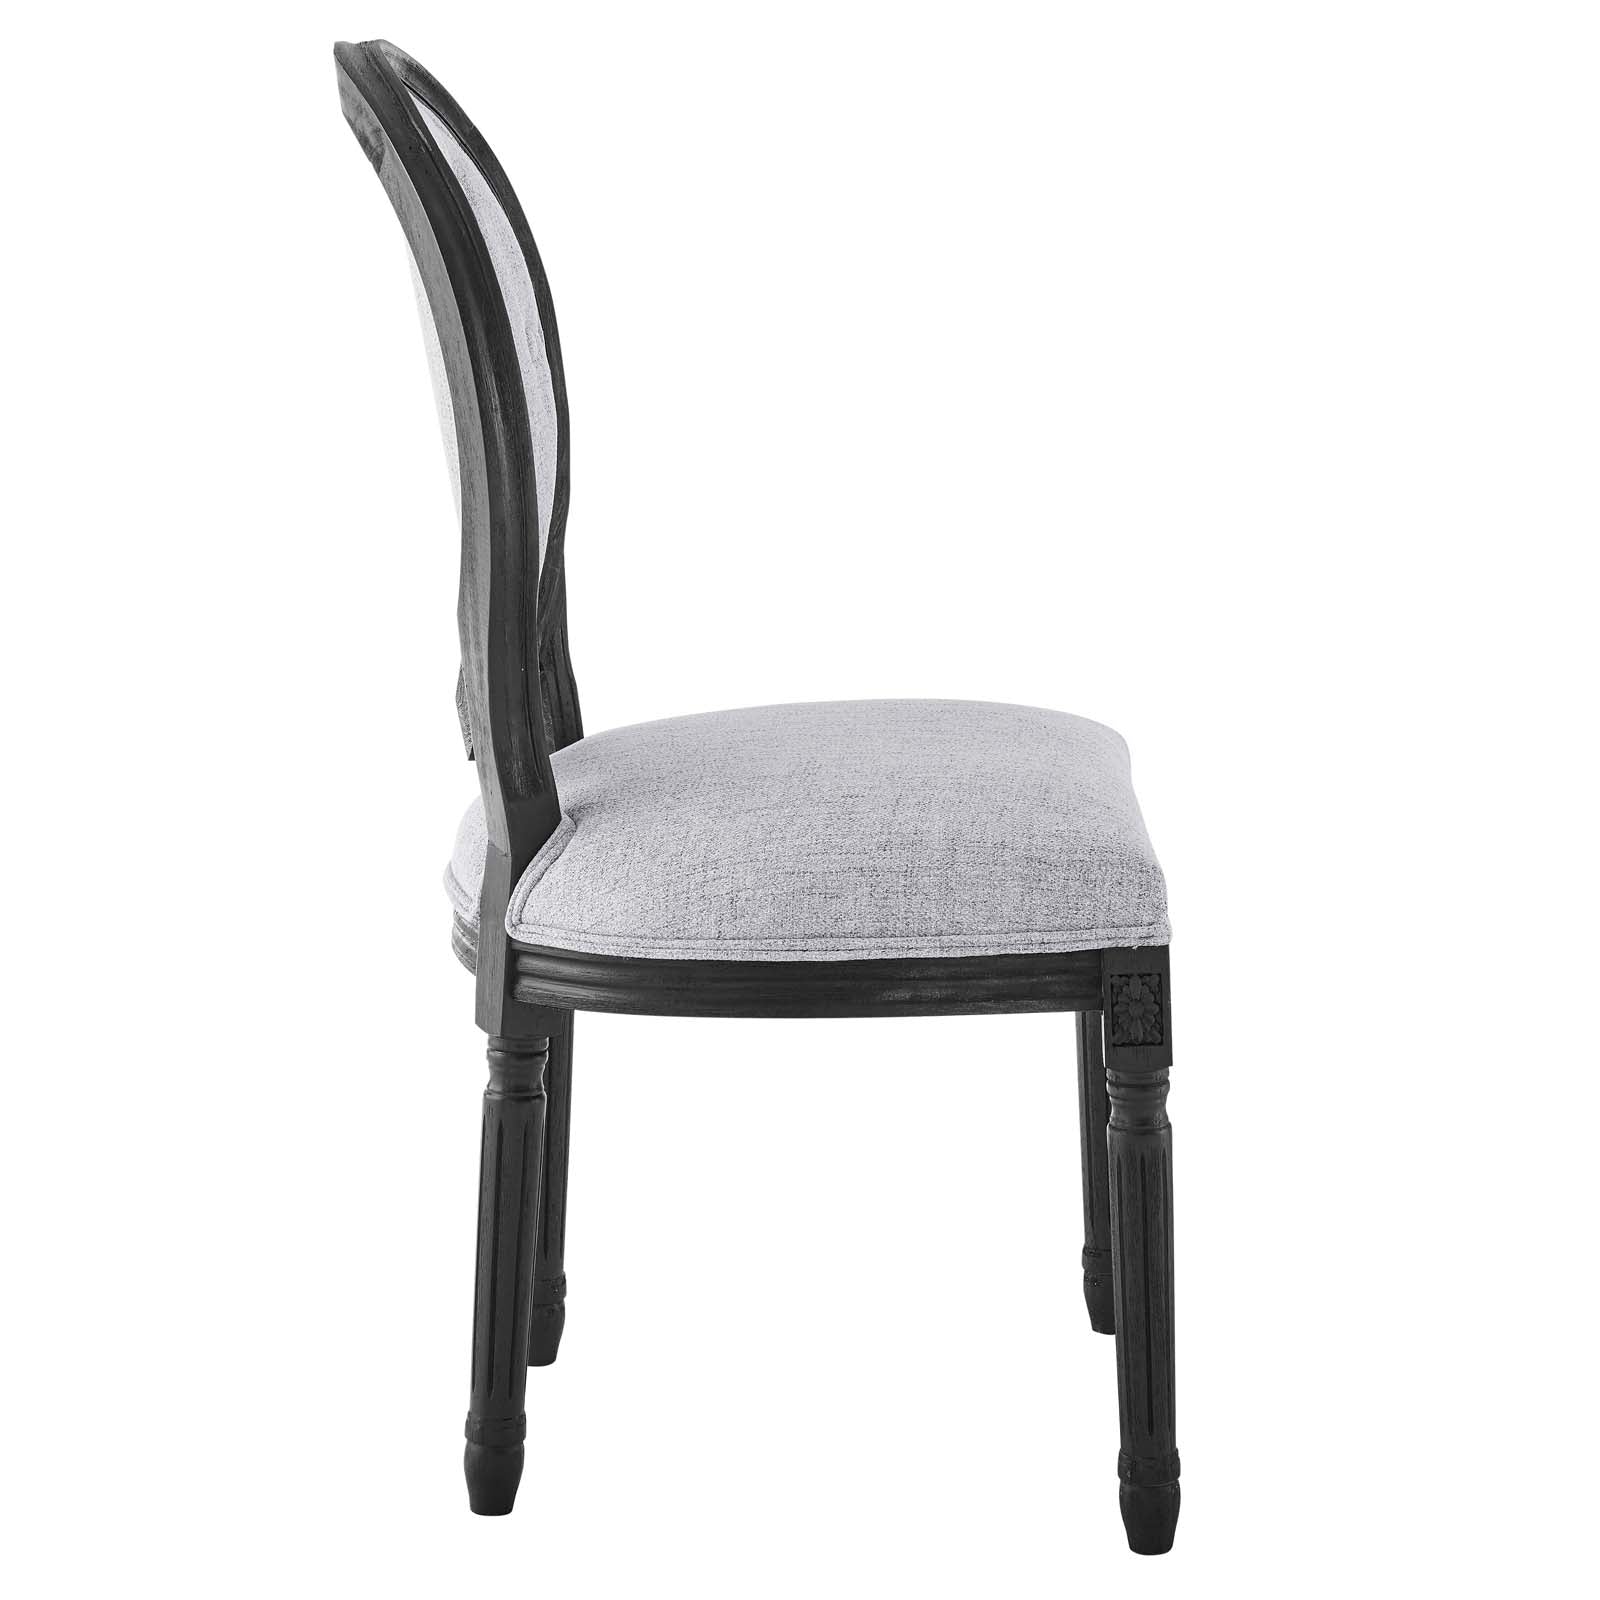 Modway Dining Chairs - Arise Vintage French Upholstered Fabric Dining Side Chair Black Light Gray